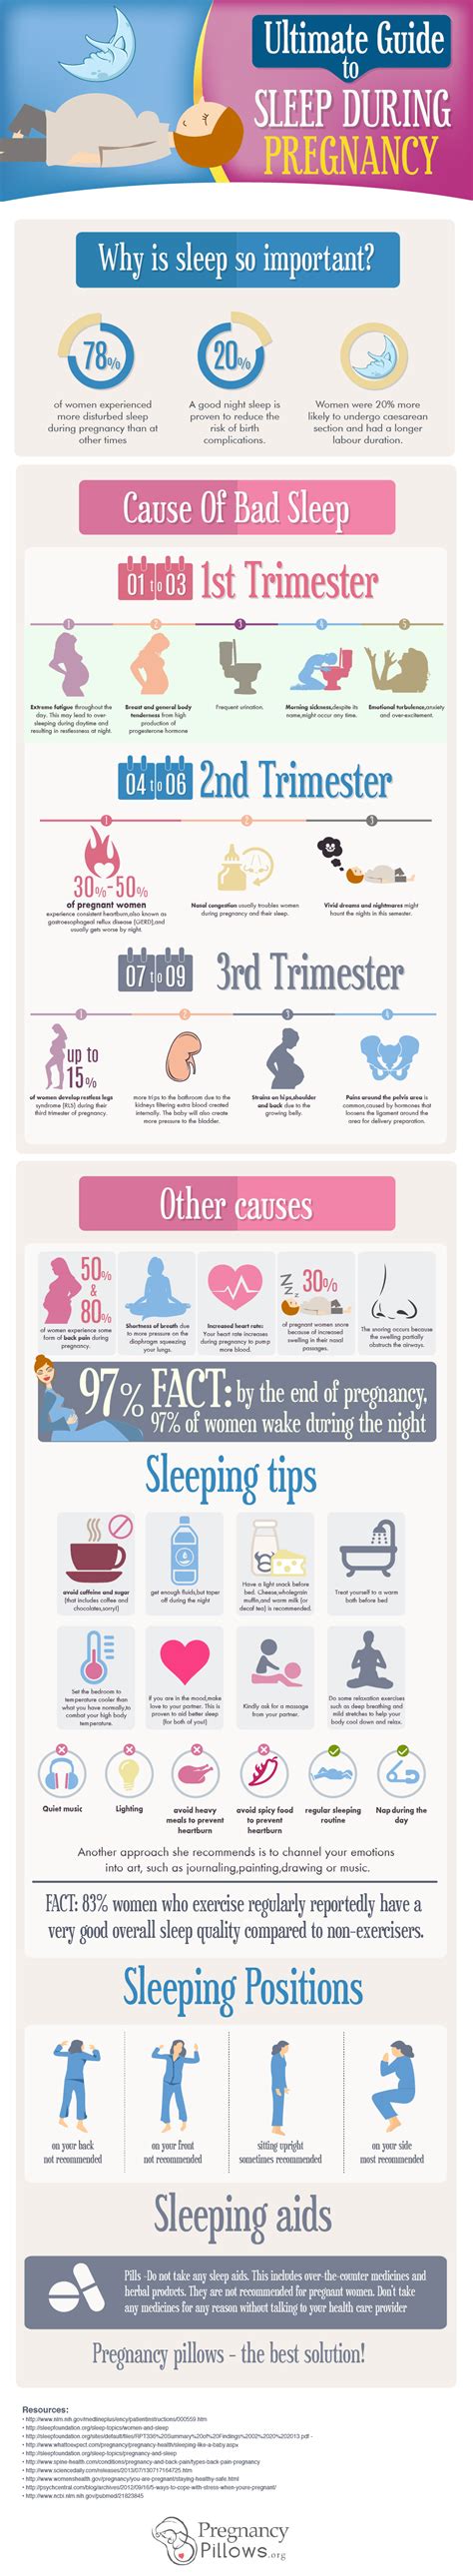 Ultimate Guide To Sleeping During Pregnancy Infographic ~ Visualistan